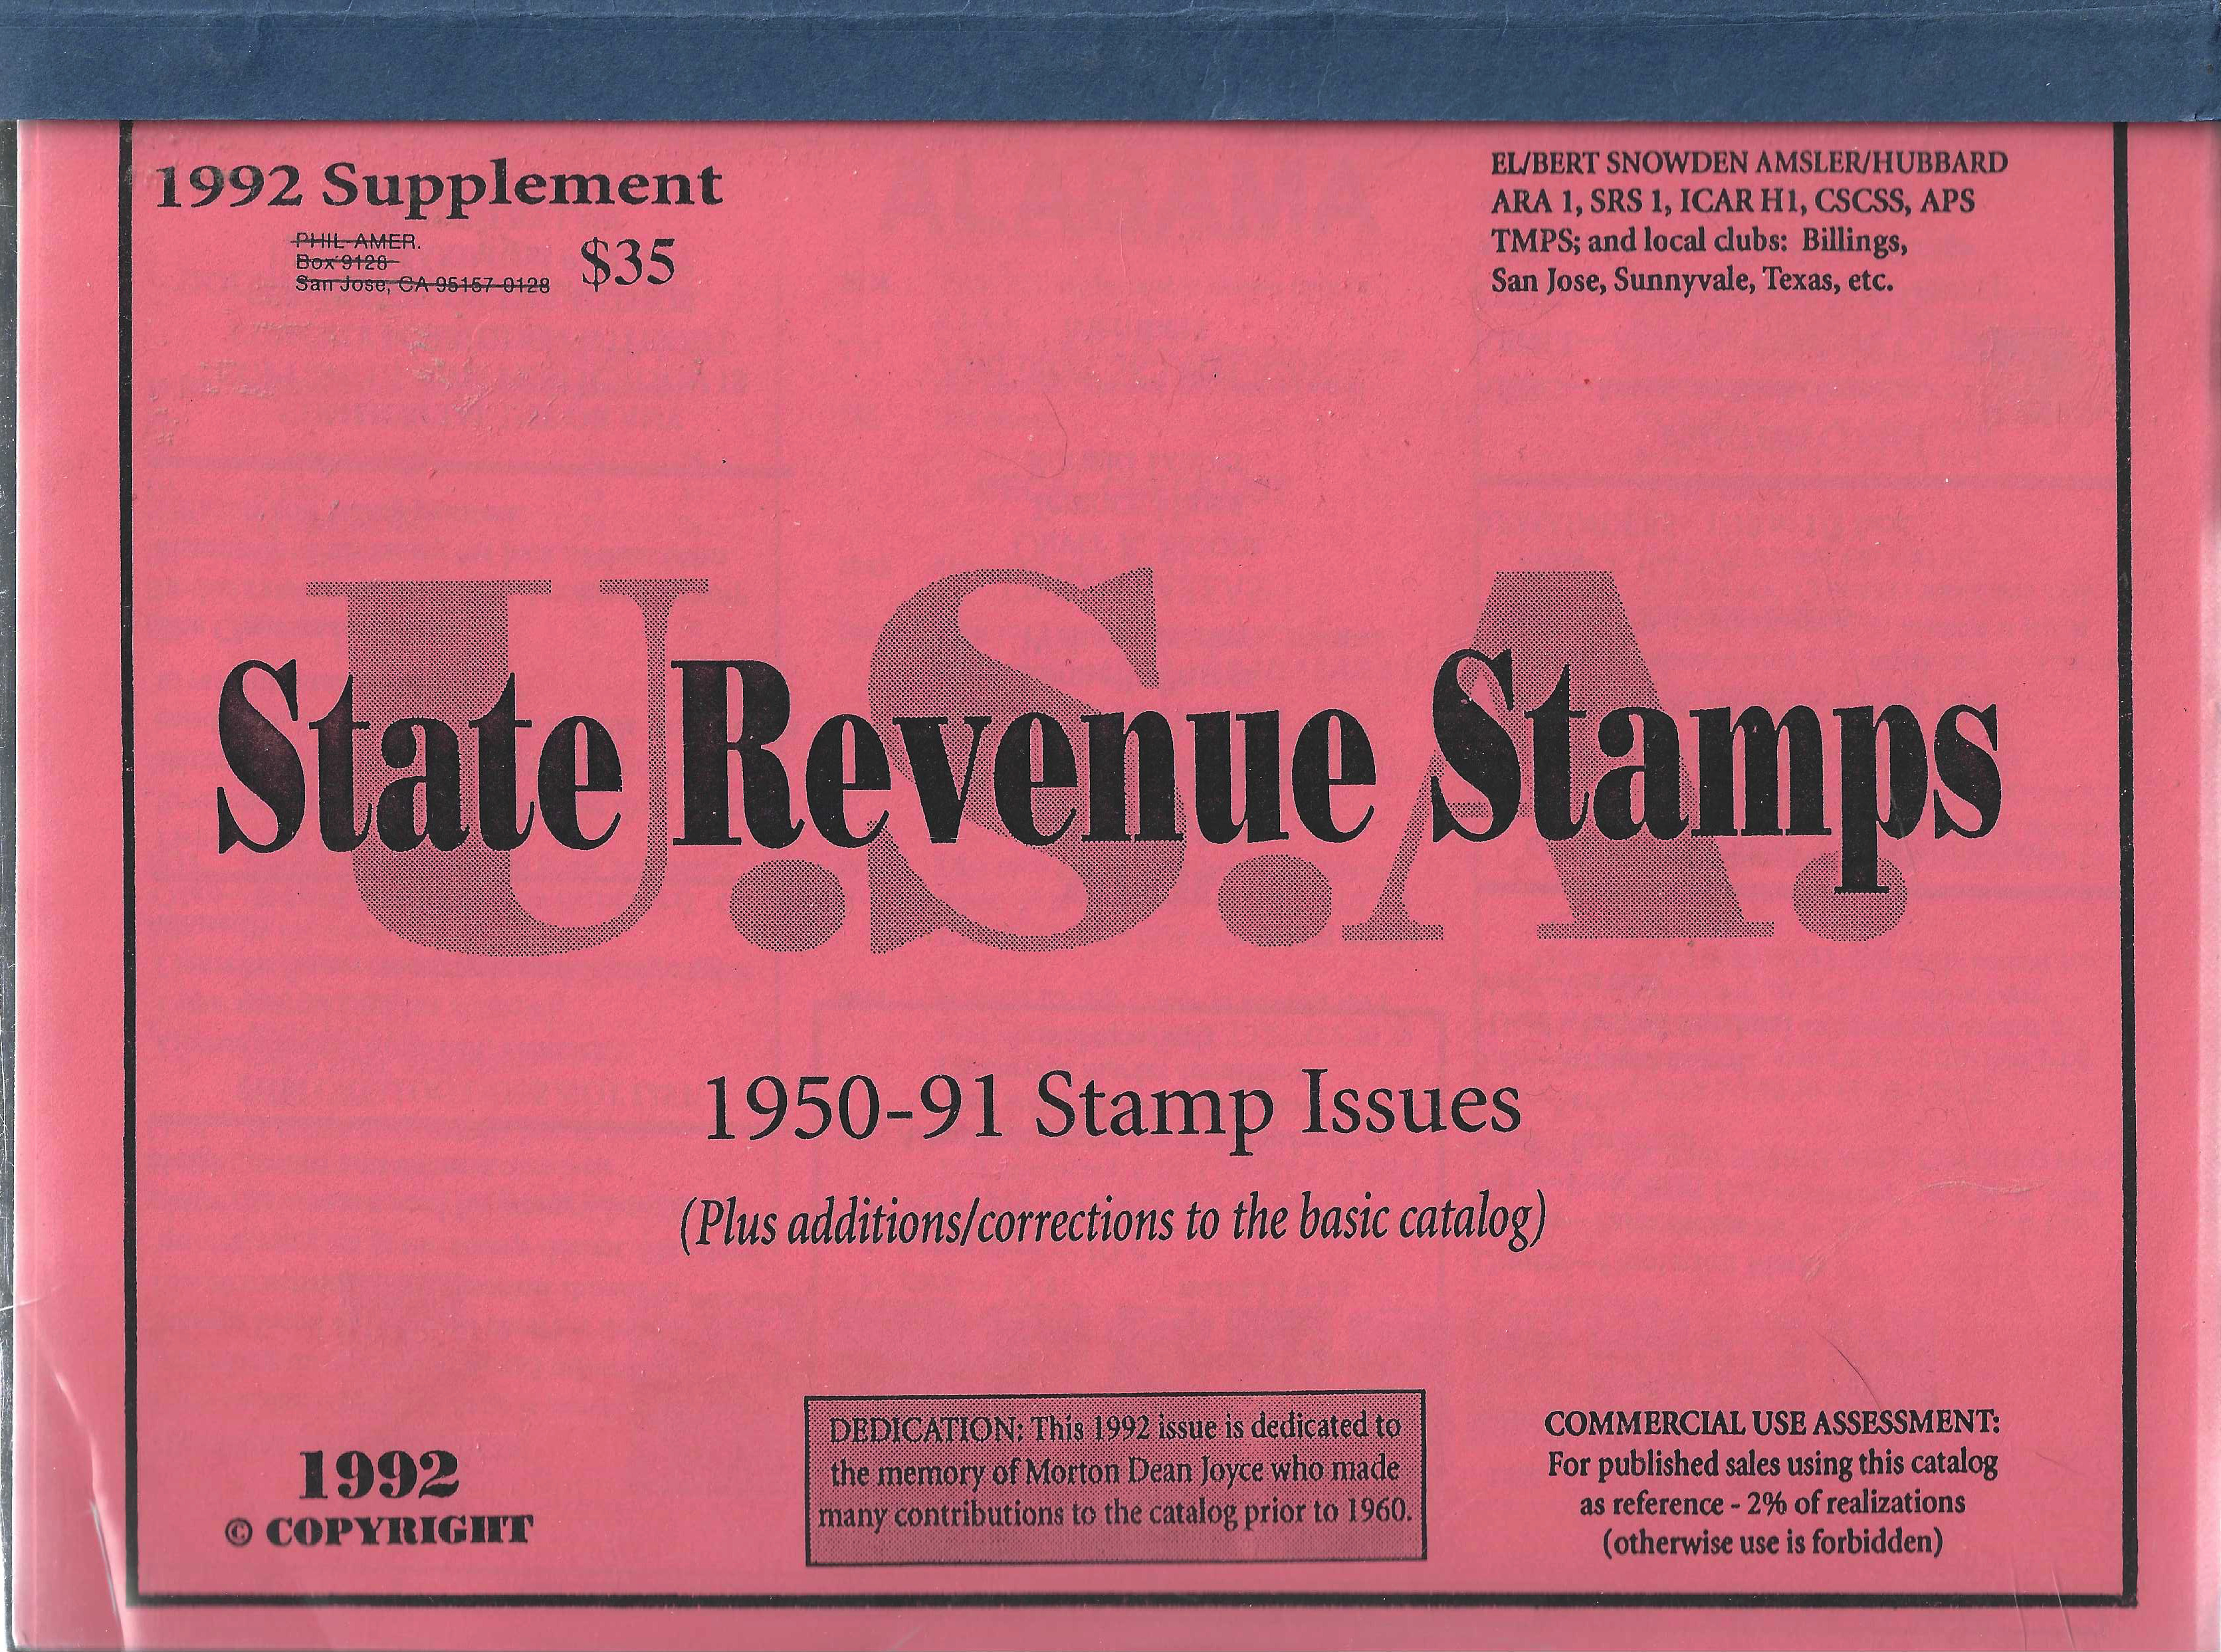 publication  Hubbard State Revenue Stamps 1992 Supplement